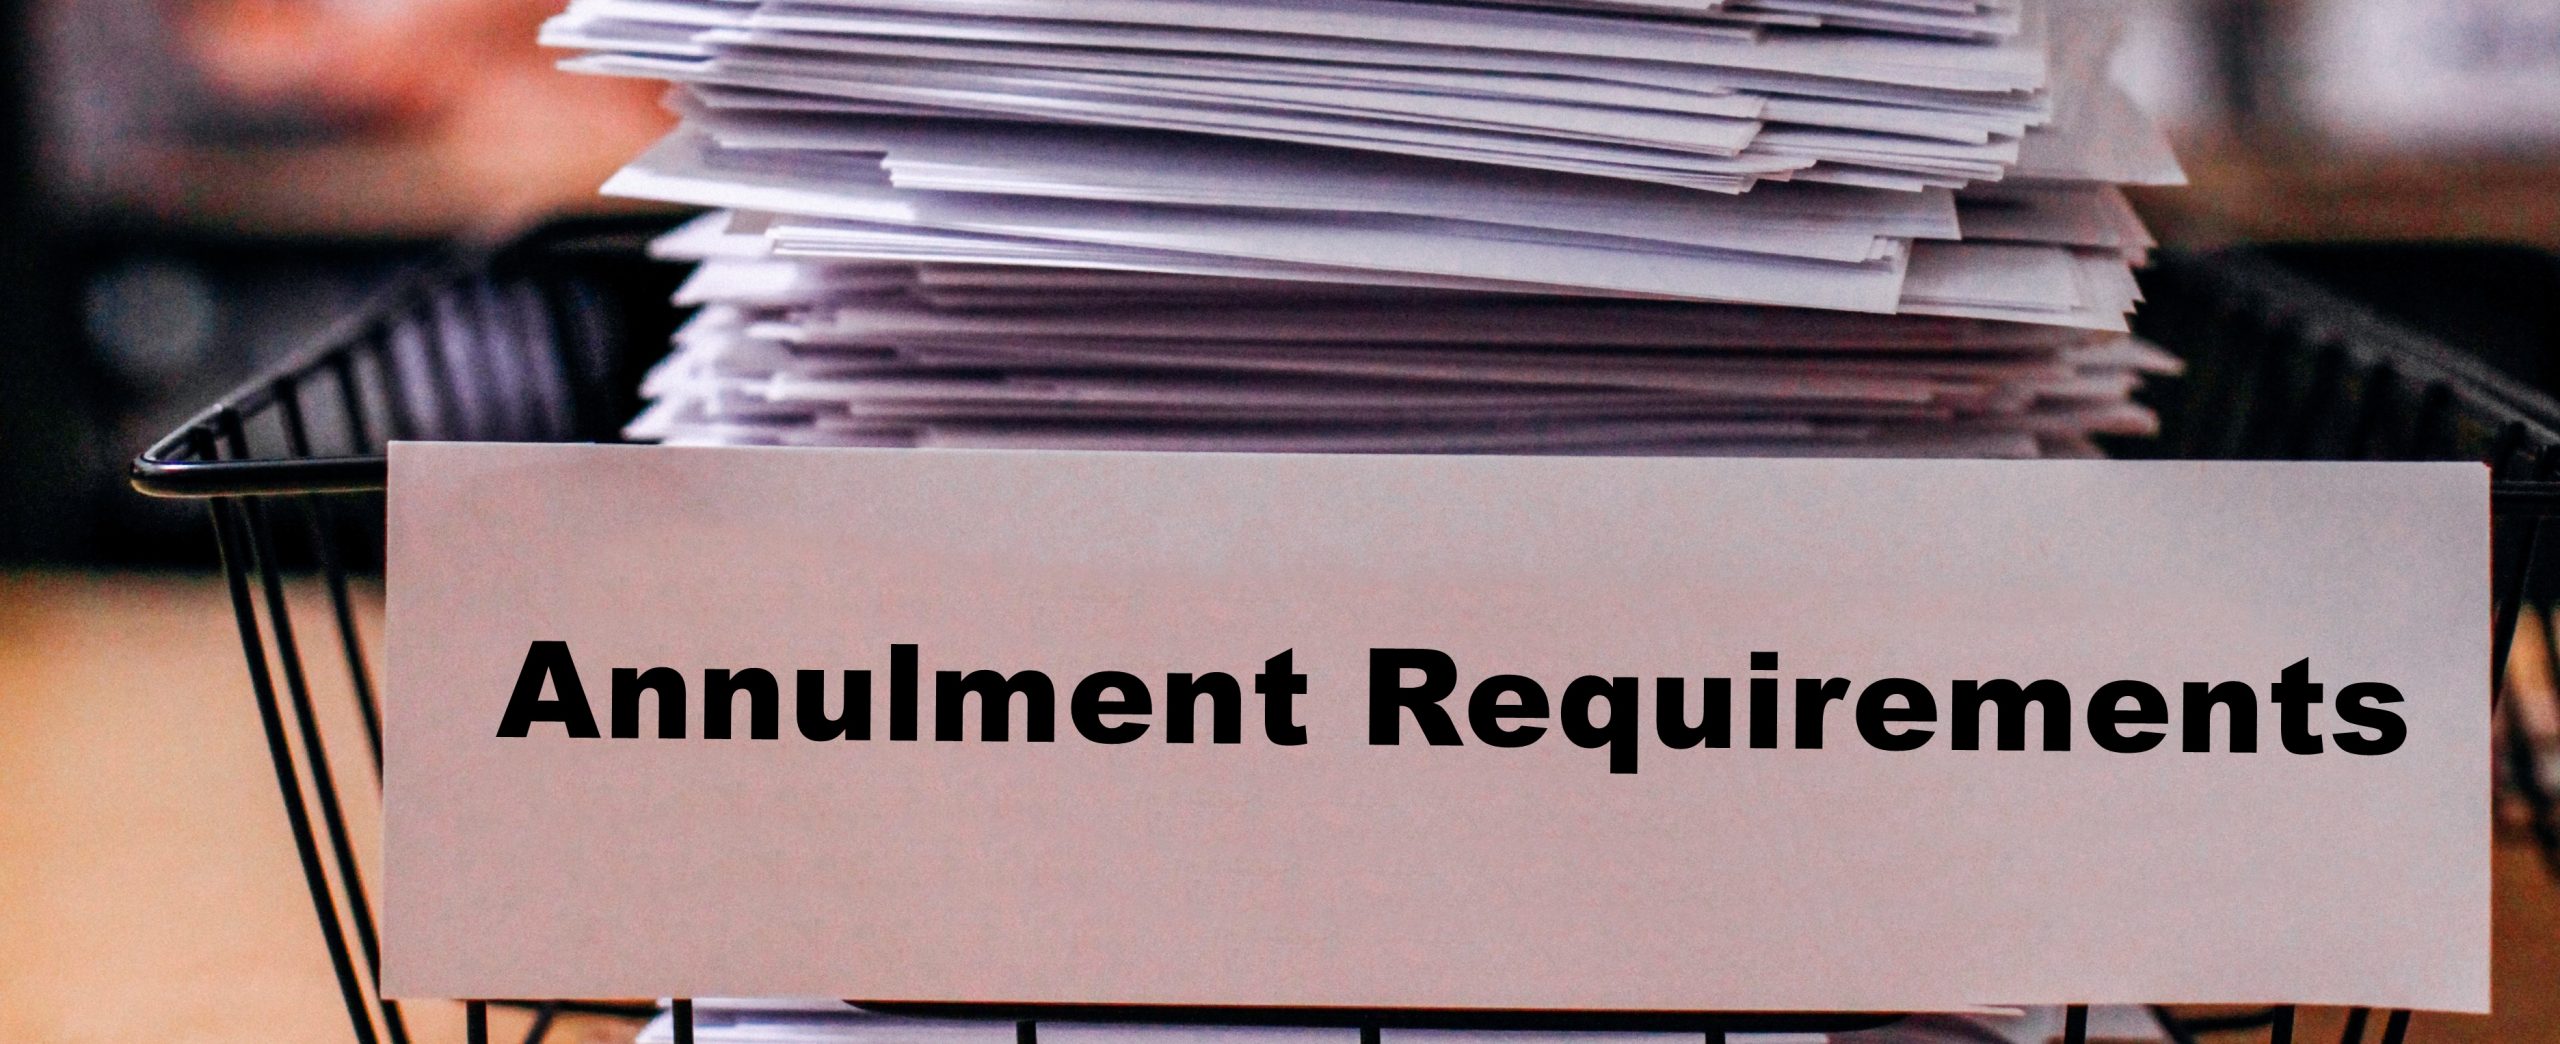 Annulment requirements text overlaid on a tray of papers